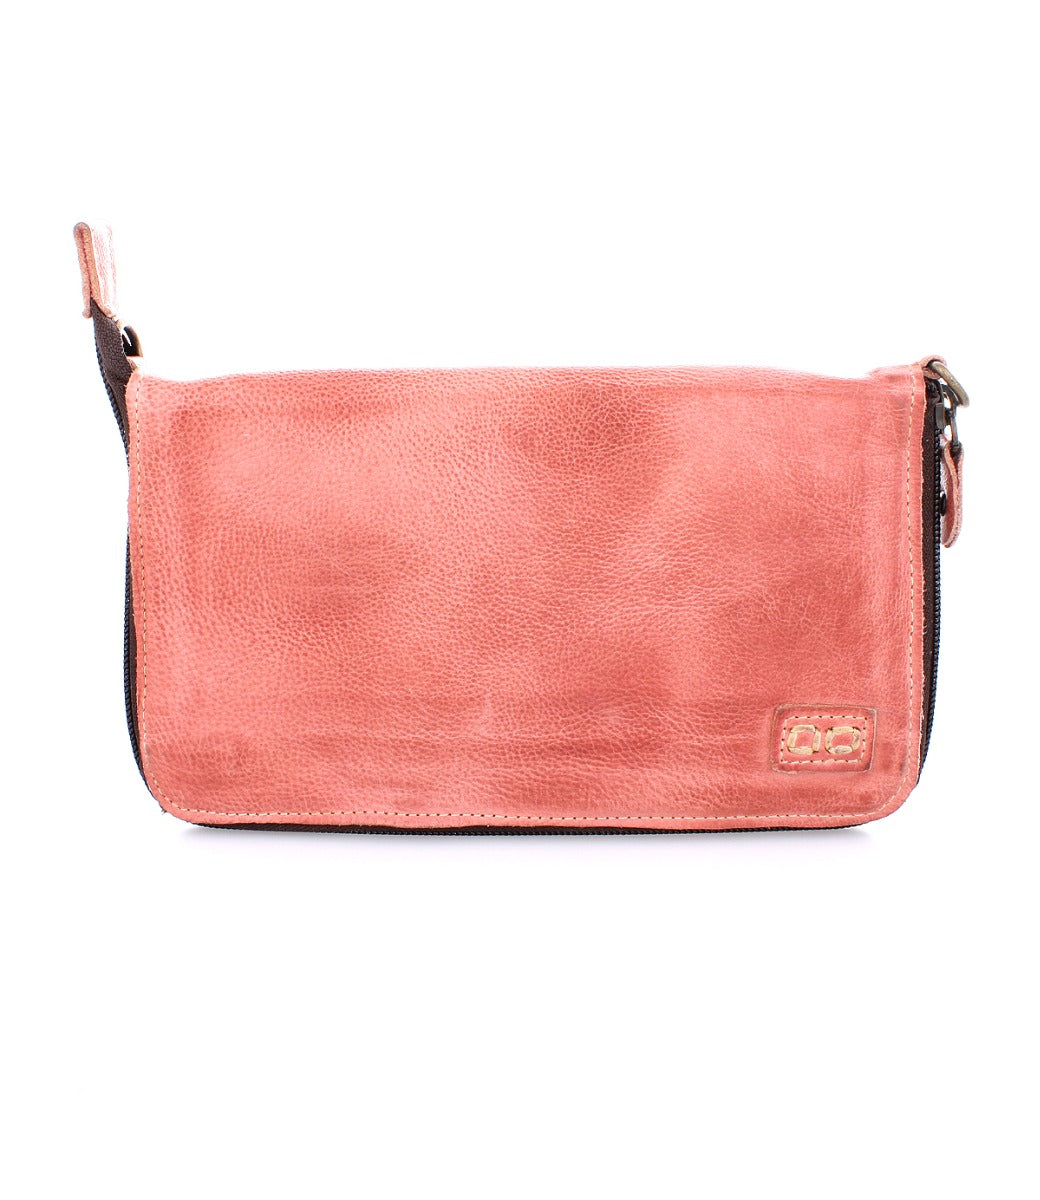 Bed Stu Templeton II pink leather multi-functional leather clutch.